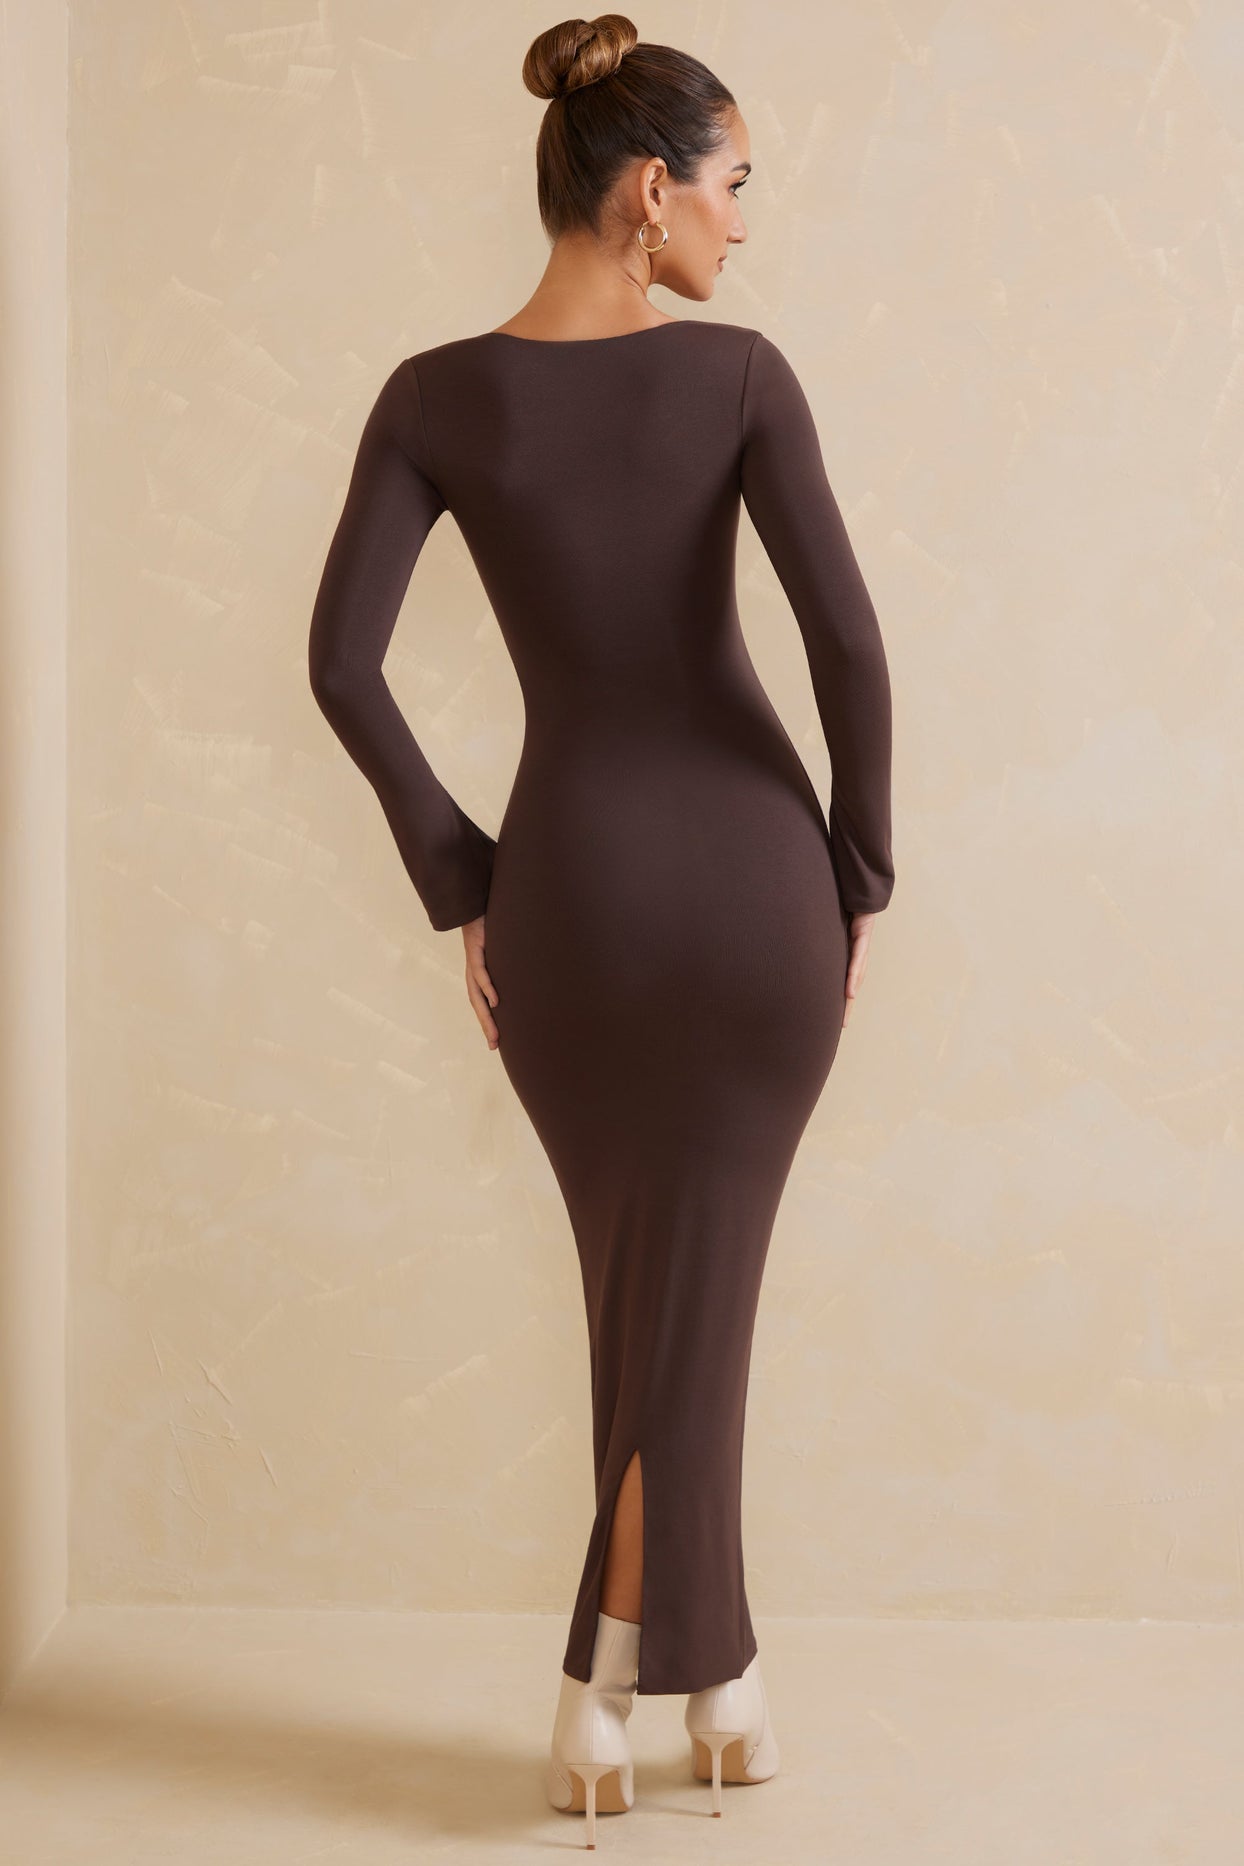 Square Neck Long Sleeve Maxi Dress in Chocolate